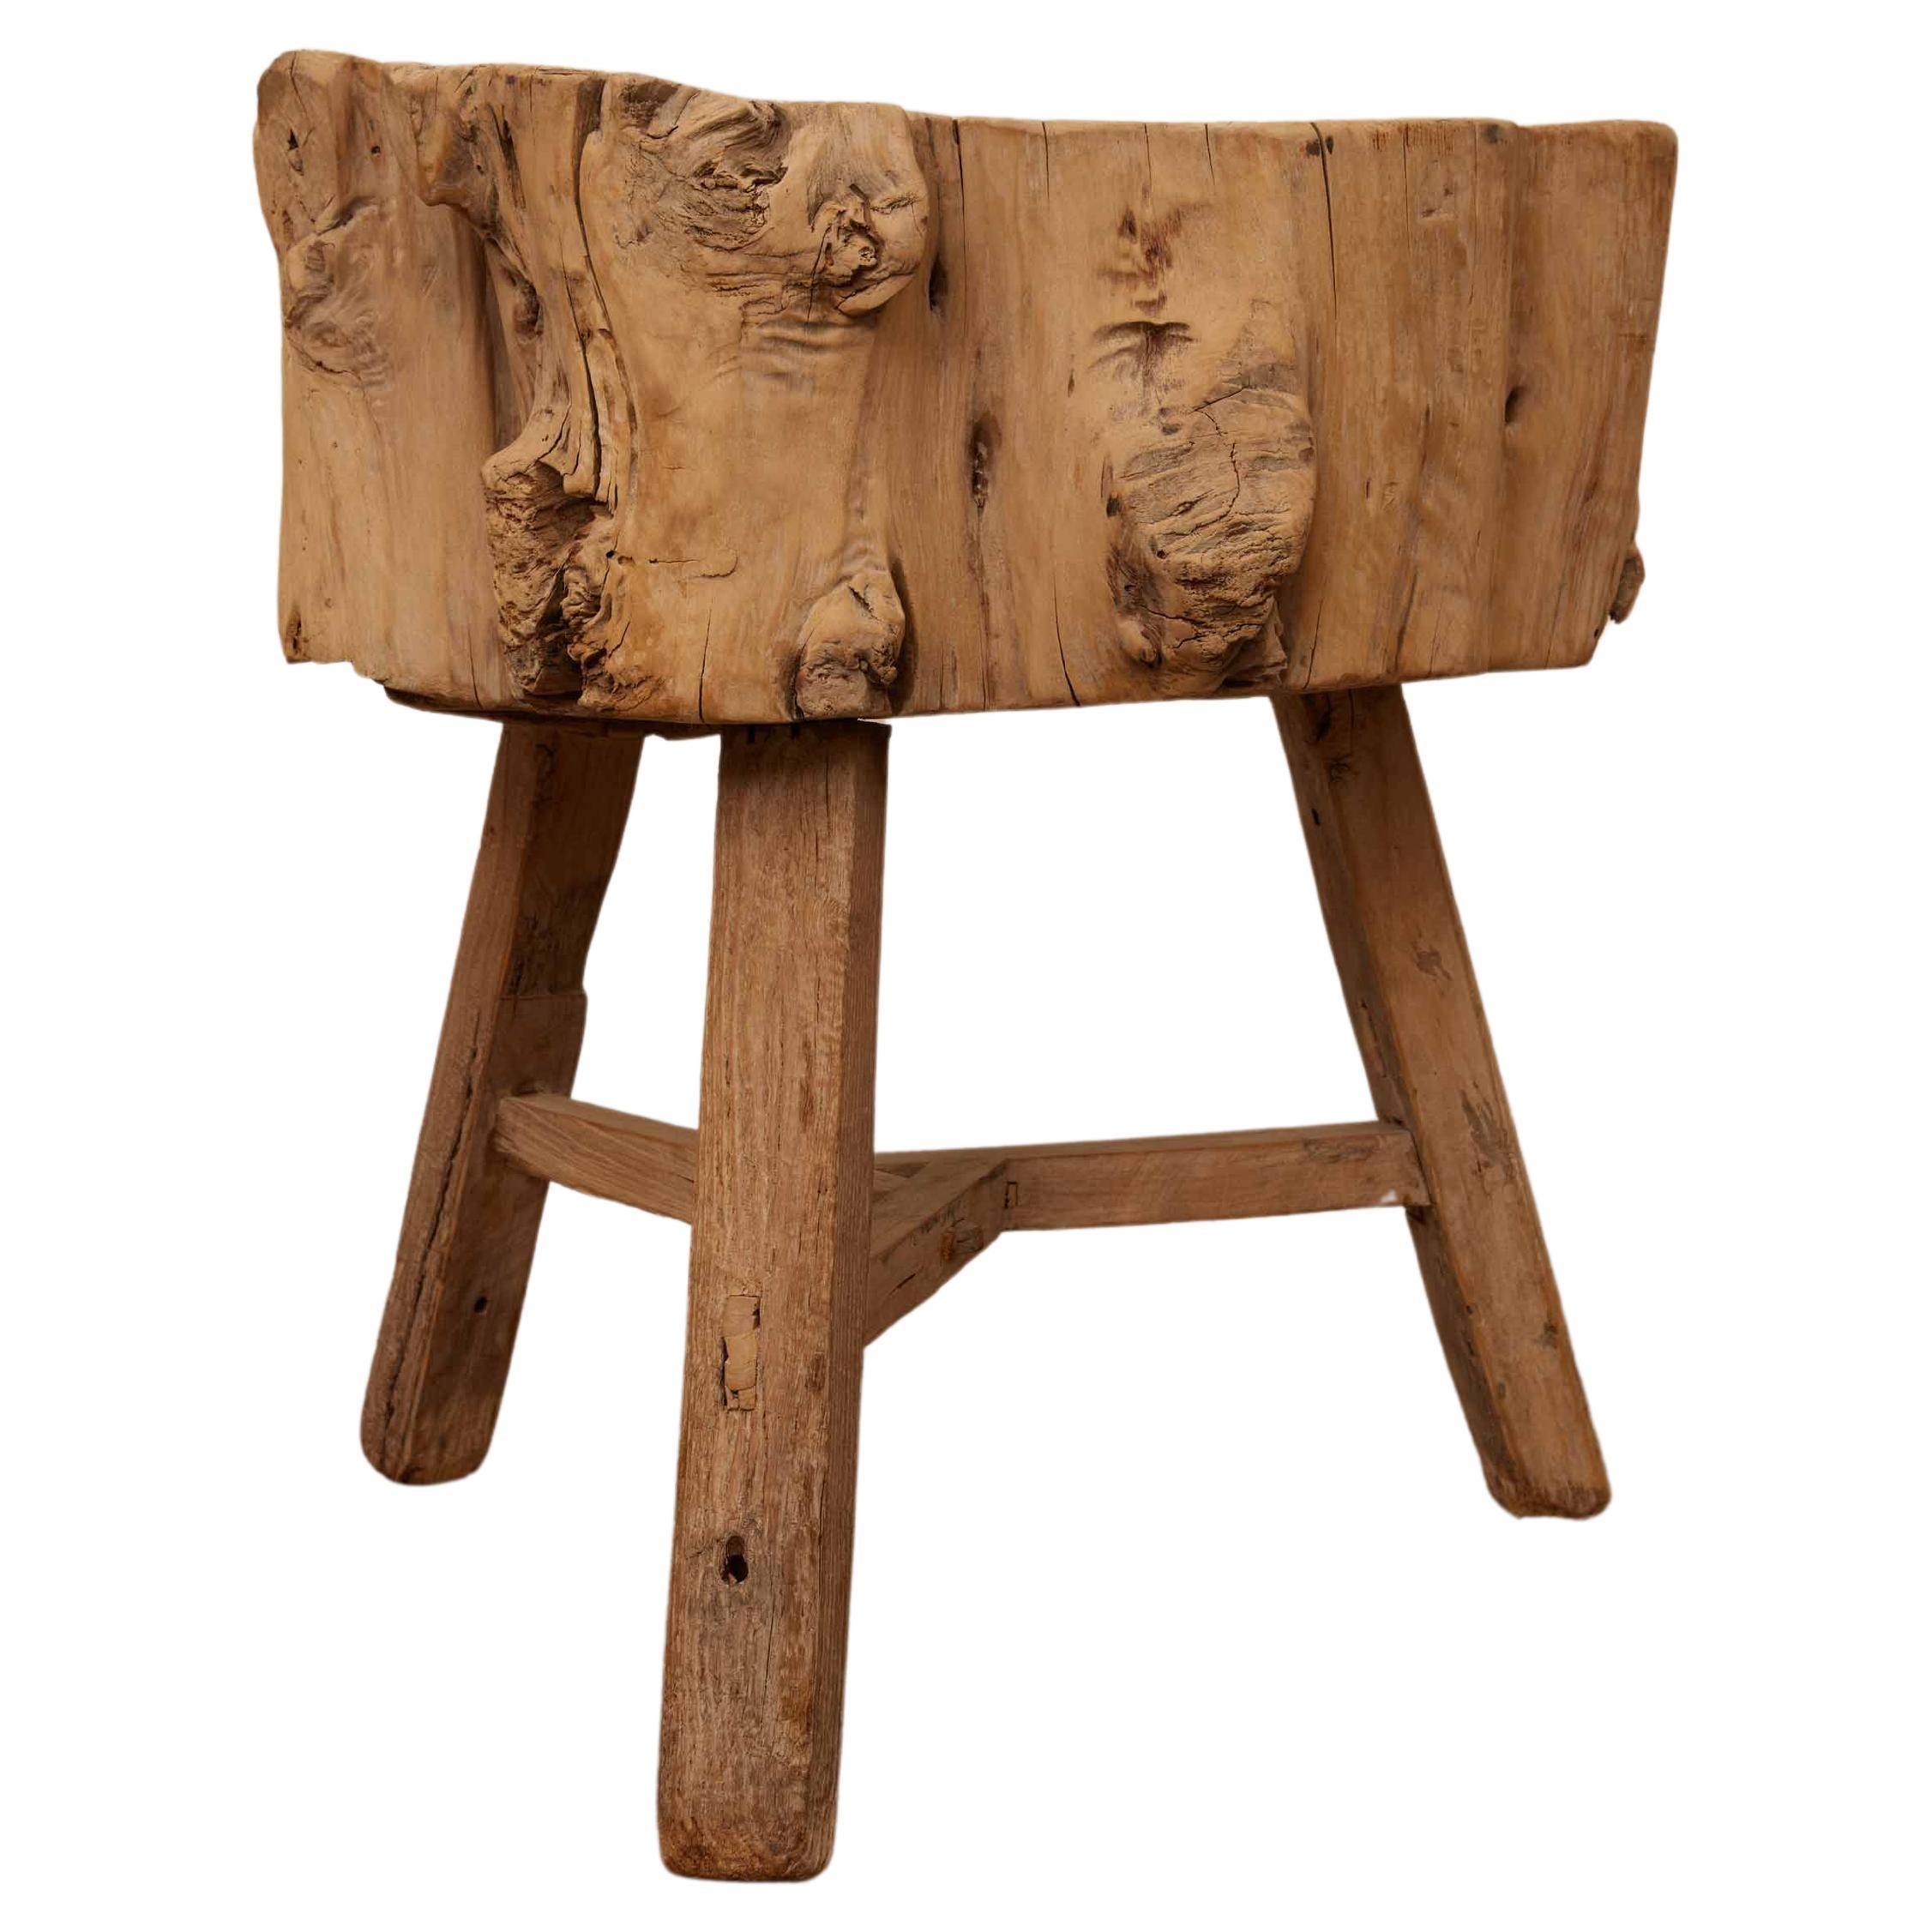  19th Century French Elm Chopping Block Table that exudes rustic charm and authenticity. Crafted from a single, robust stump of natural elm wood, this piece stands as a testament to the timeless beauty and durability of traditional materials.

The